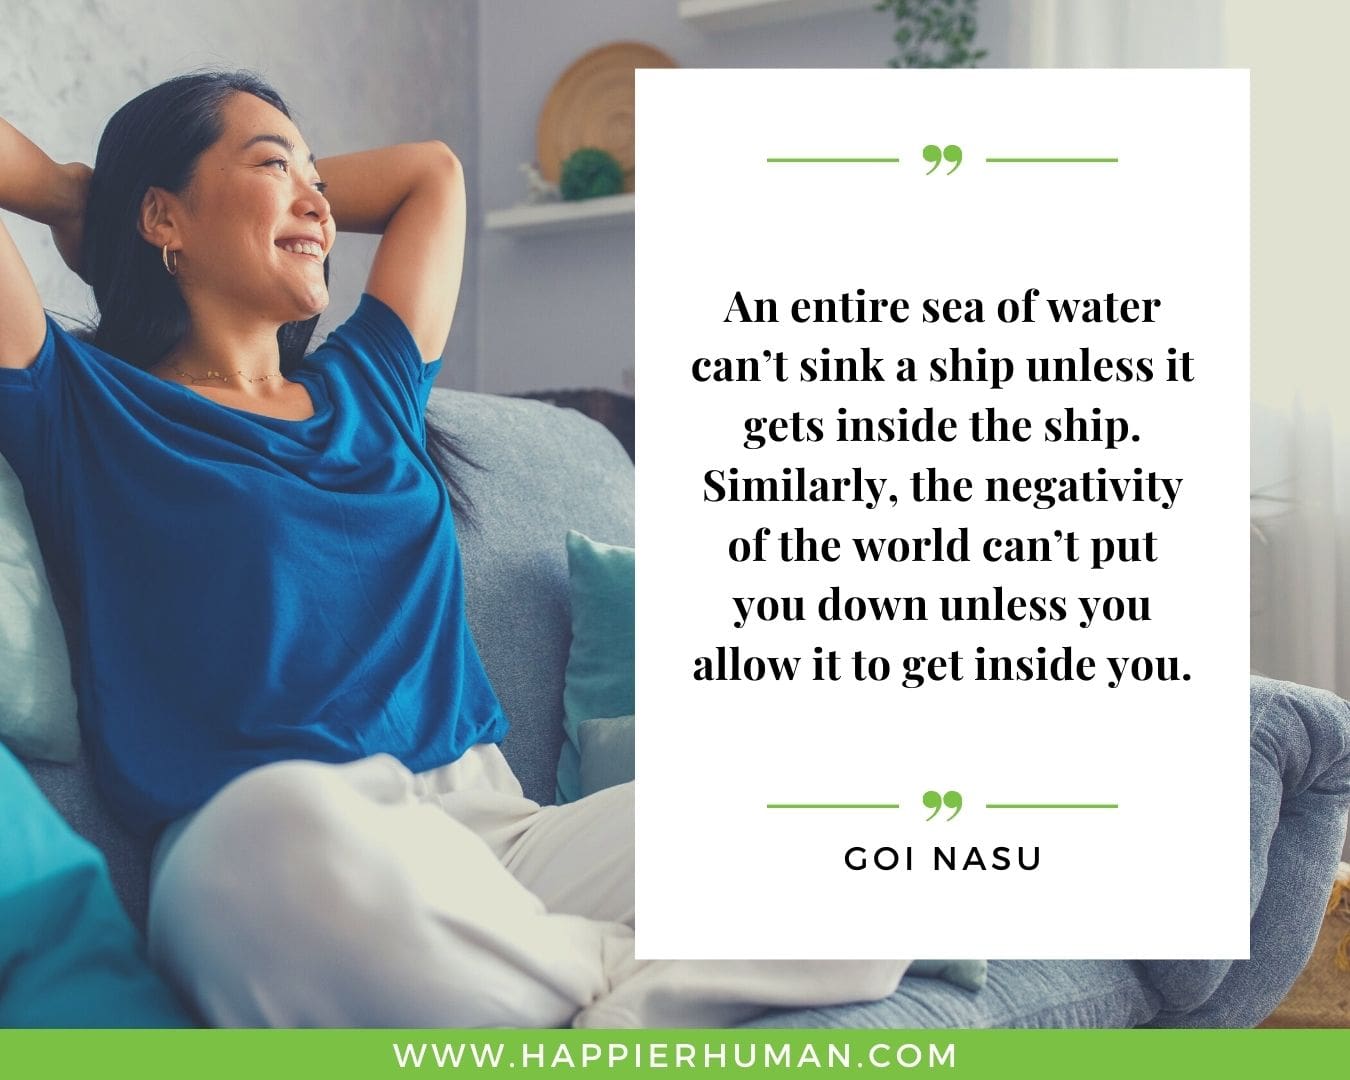 Haters Quotes - “An entire sea of water can’t sink a ship unless it gets inside the ship. Similarly, the negativity of the world can’t put you down unless you allow it to get inside you.” - Goi Nasu